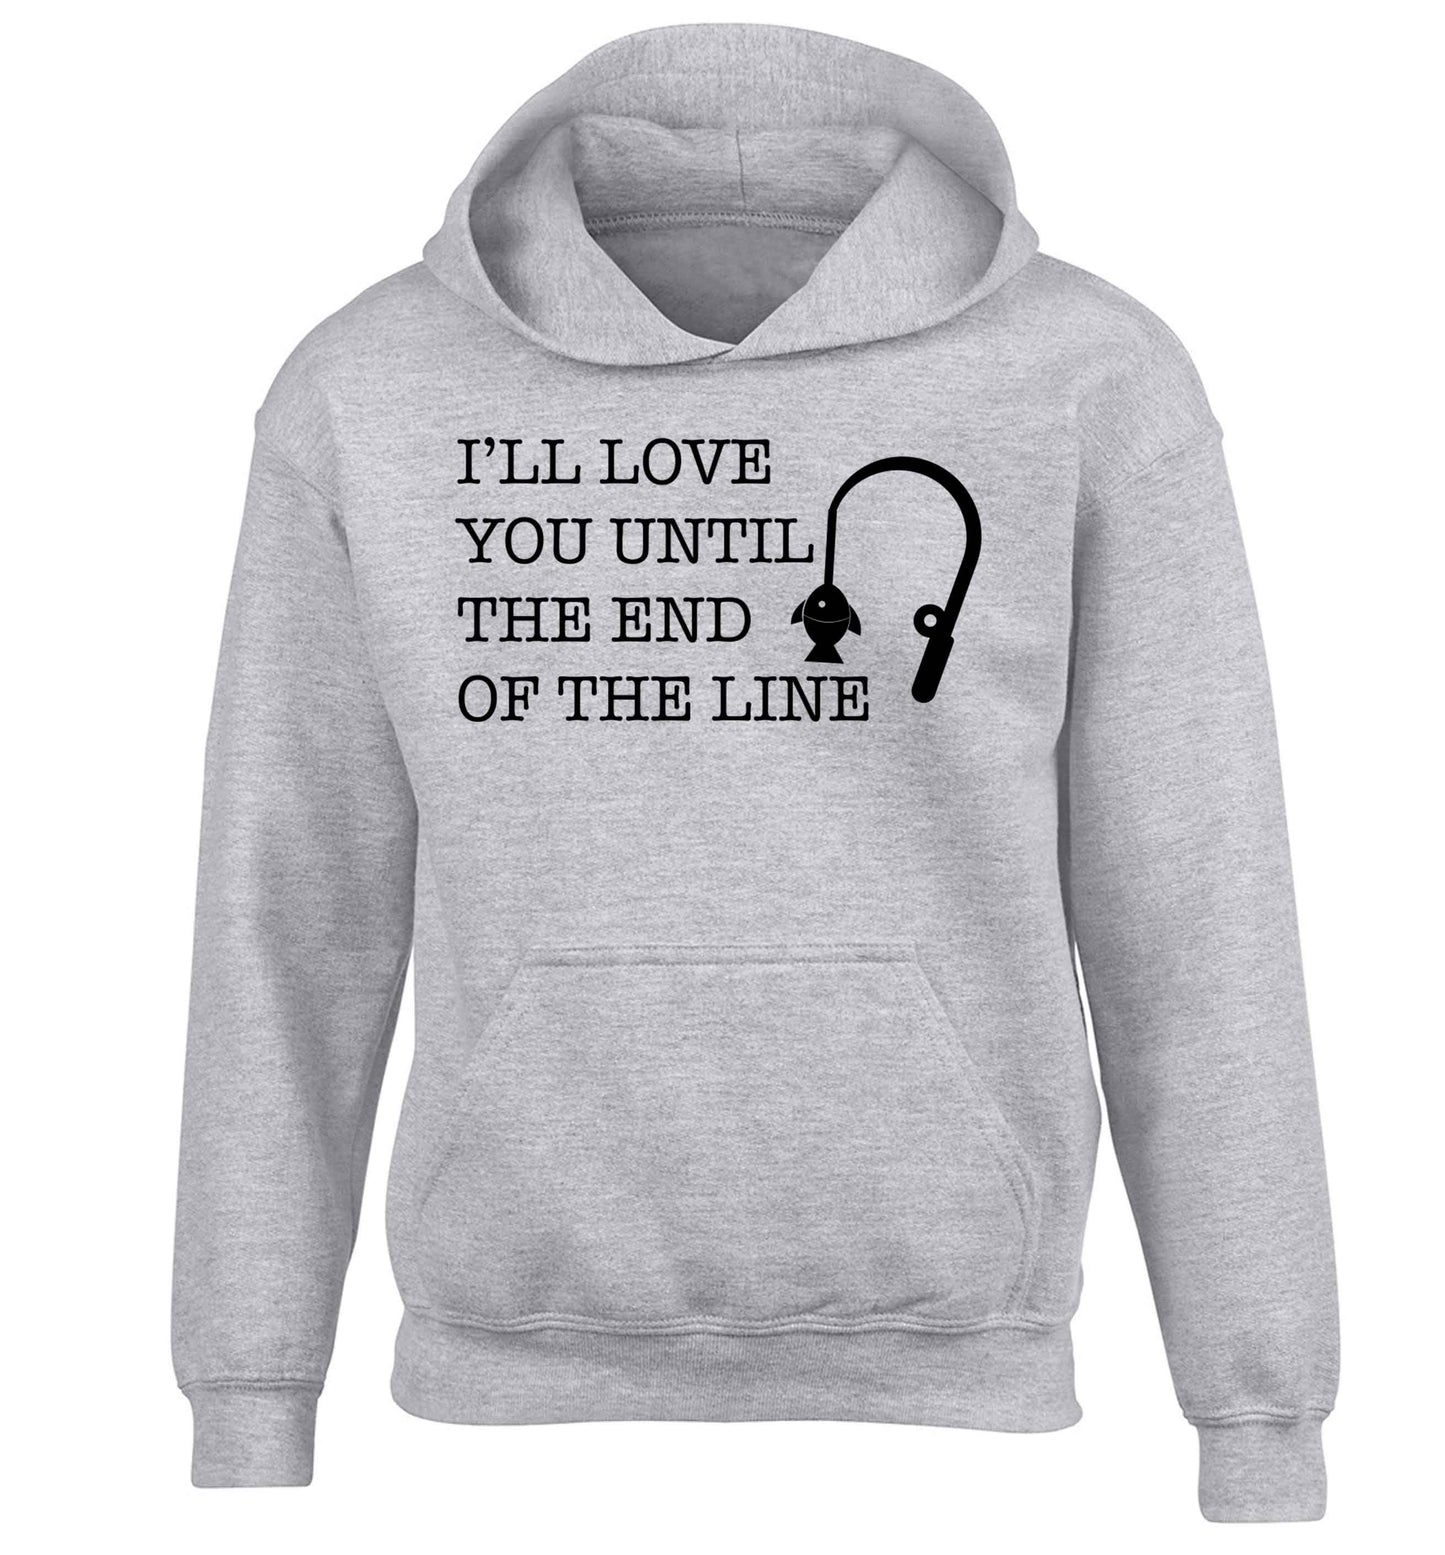 I'll love you until the end of the line children's grey hoodie 12-13 Years